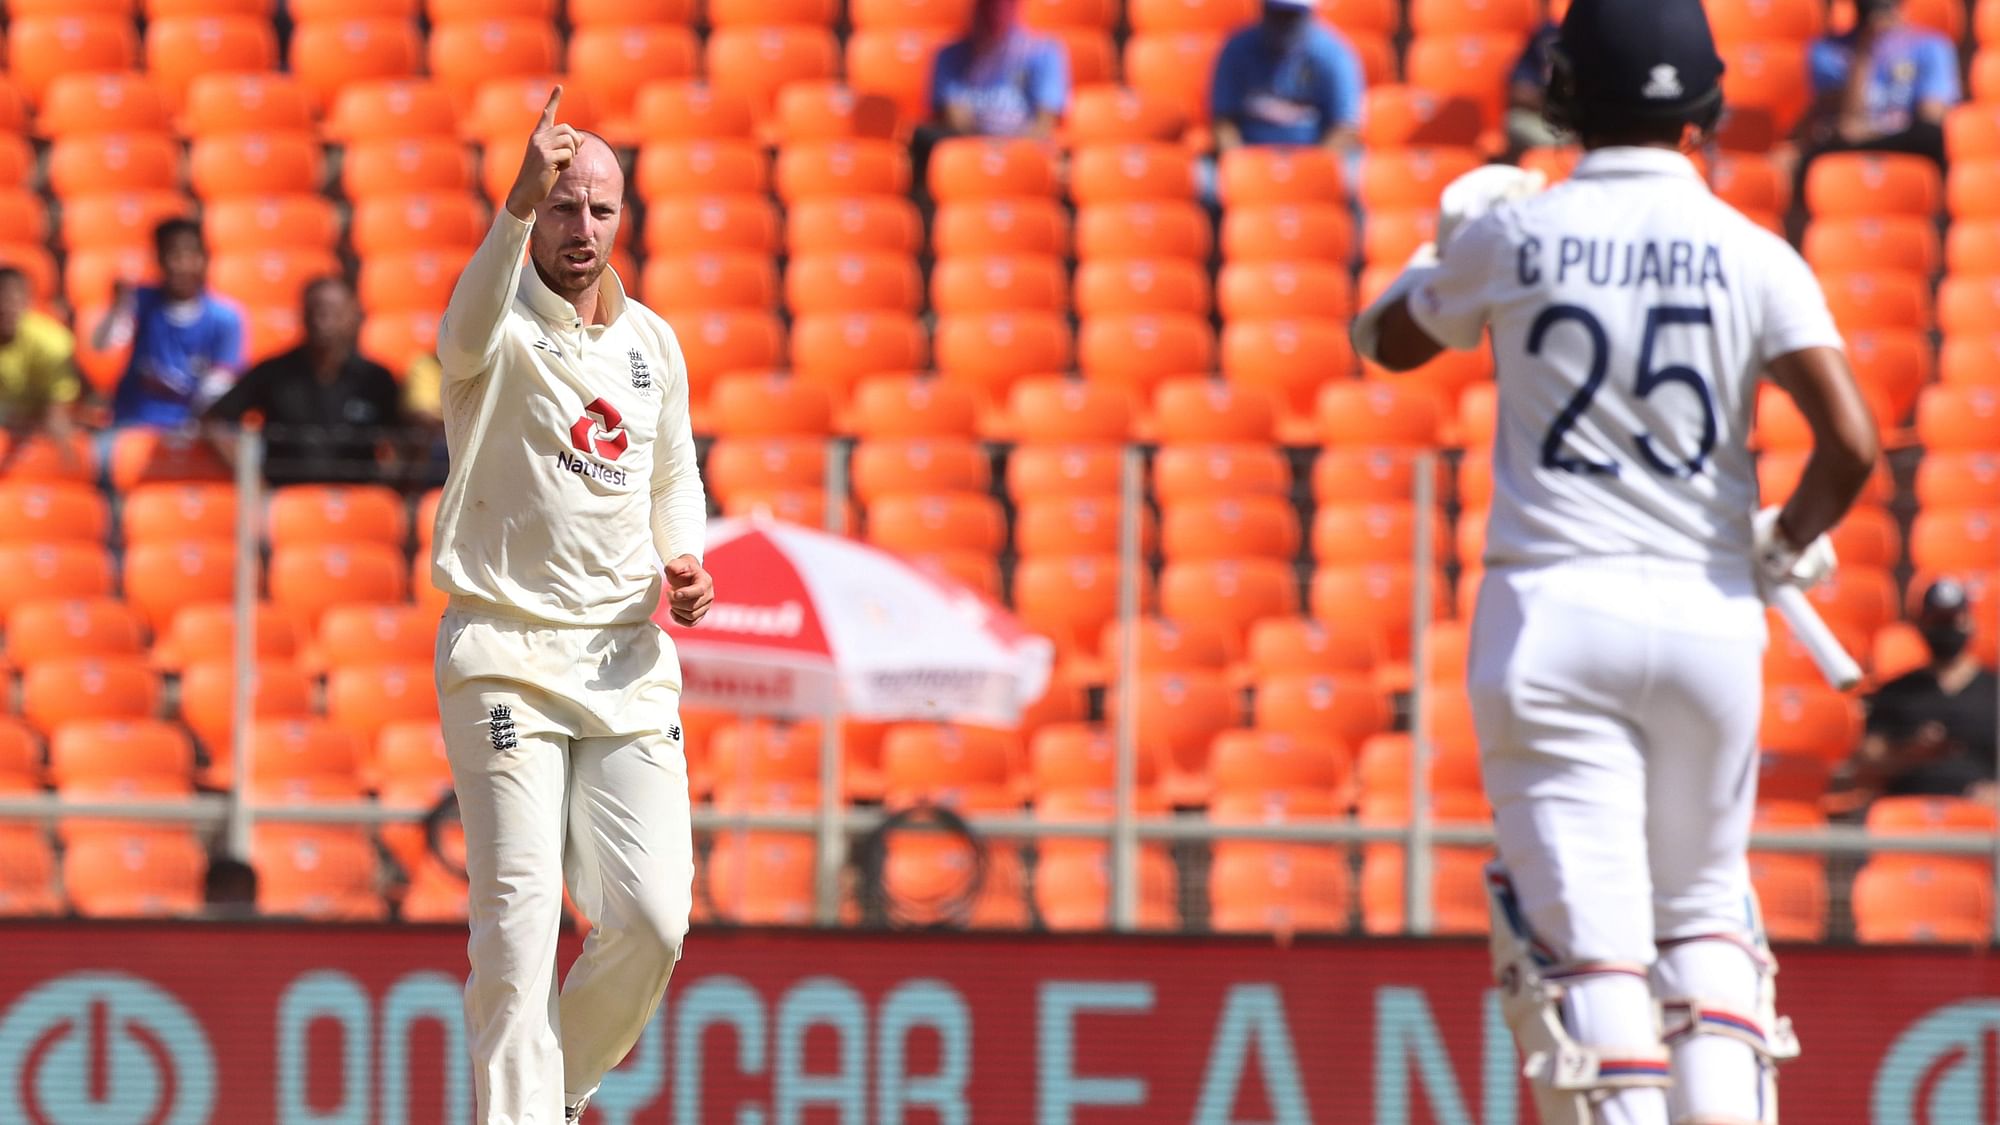 Jack Leach celebrates the wicket of Cheteshwar Pujara on Day 2 in the fourth Test.